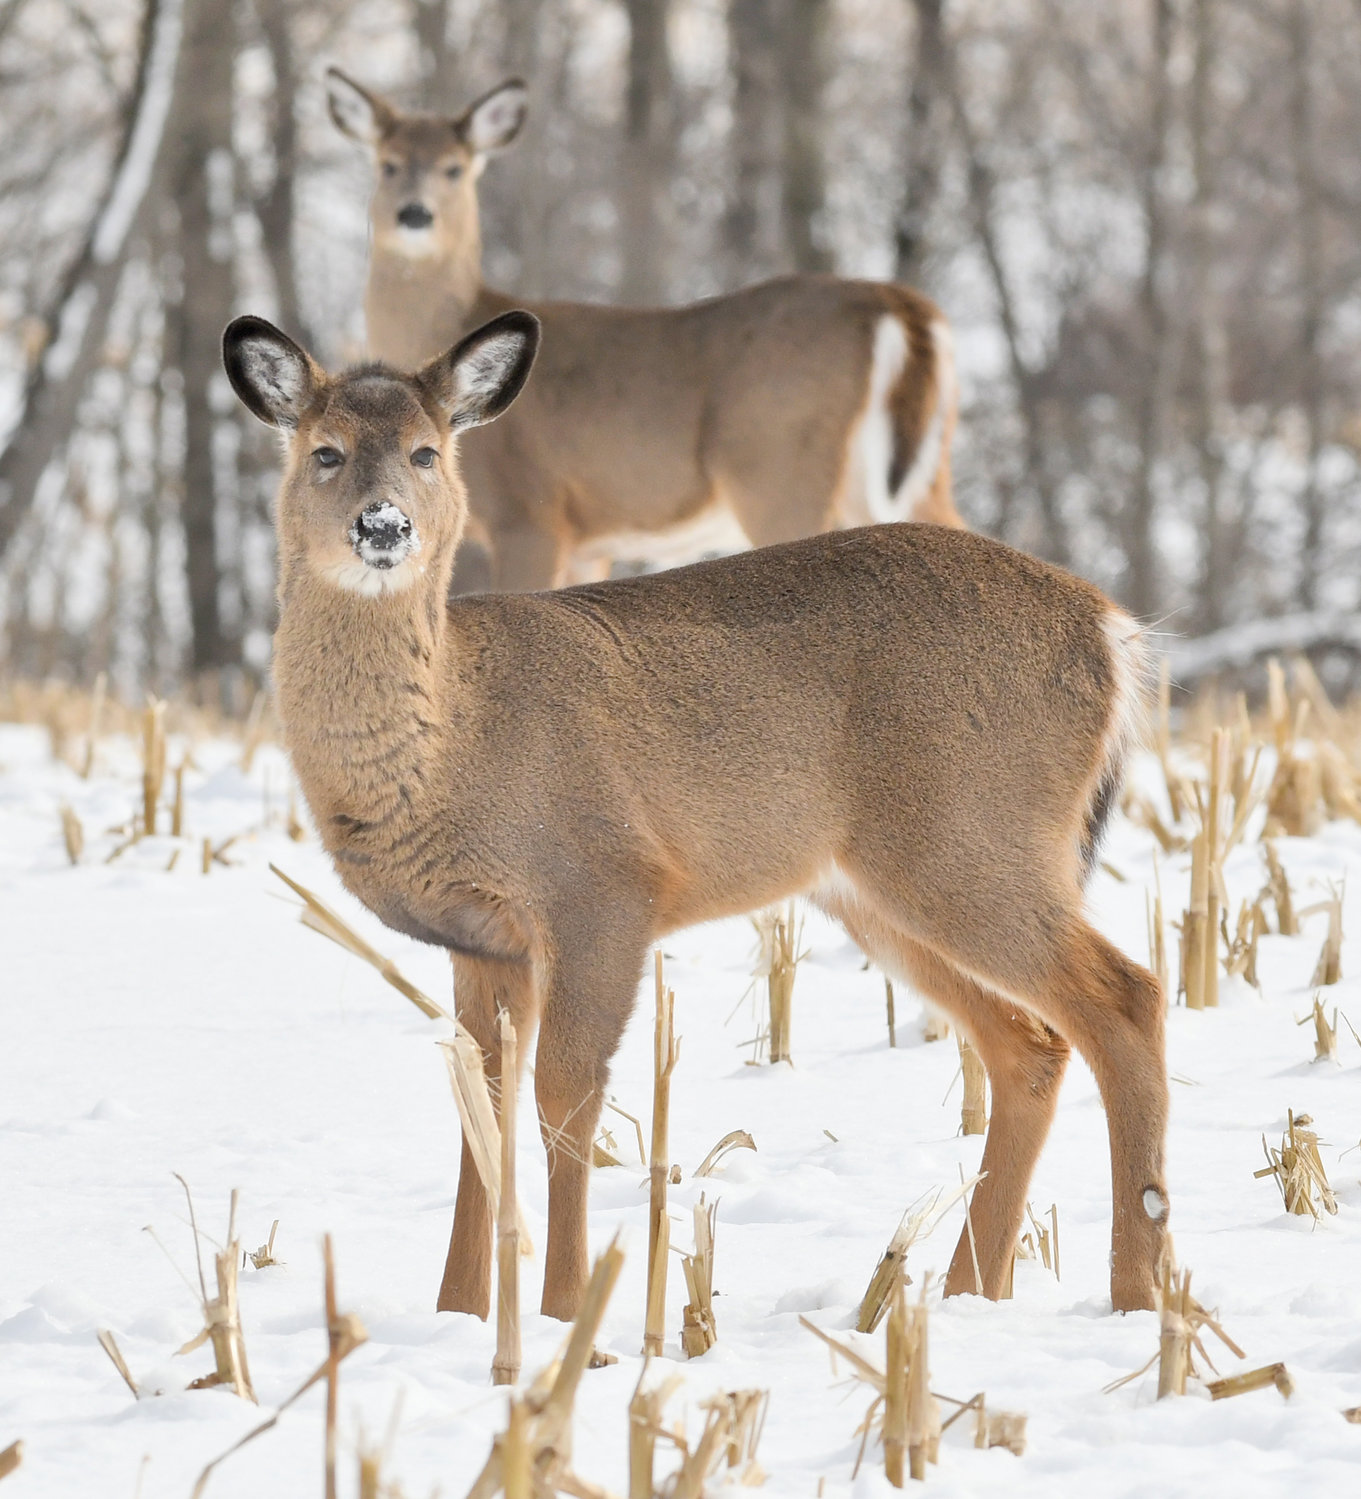 HOLIDAY HUNTING — After given the opportunity, Madison County opted out of the late-season holiday hunting, citing a need for safety and consideration of others using Madison County land. Pictured: A pair of deer on Mezzler Hill Road in the town of Western.